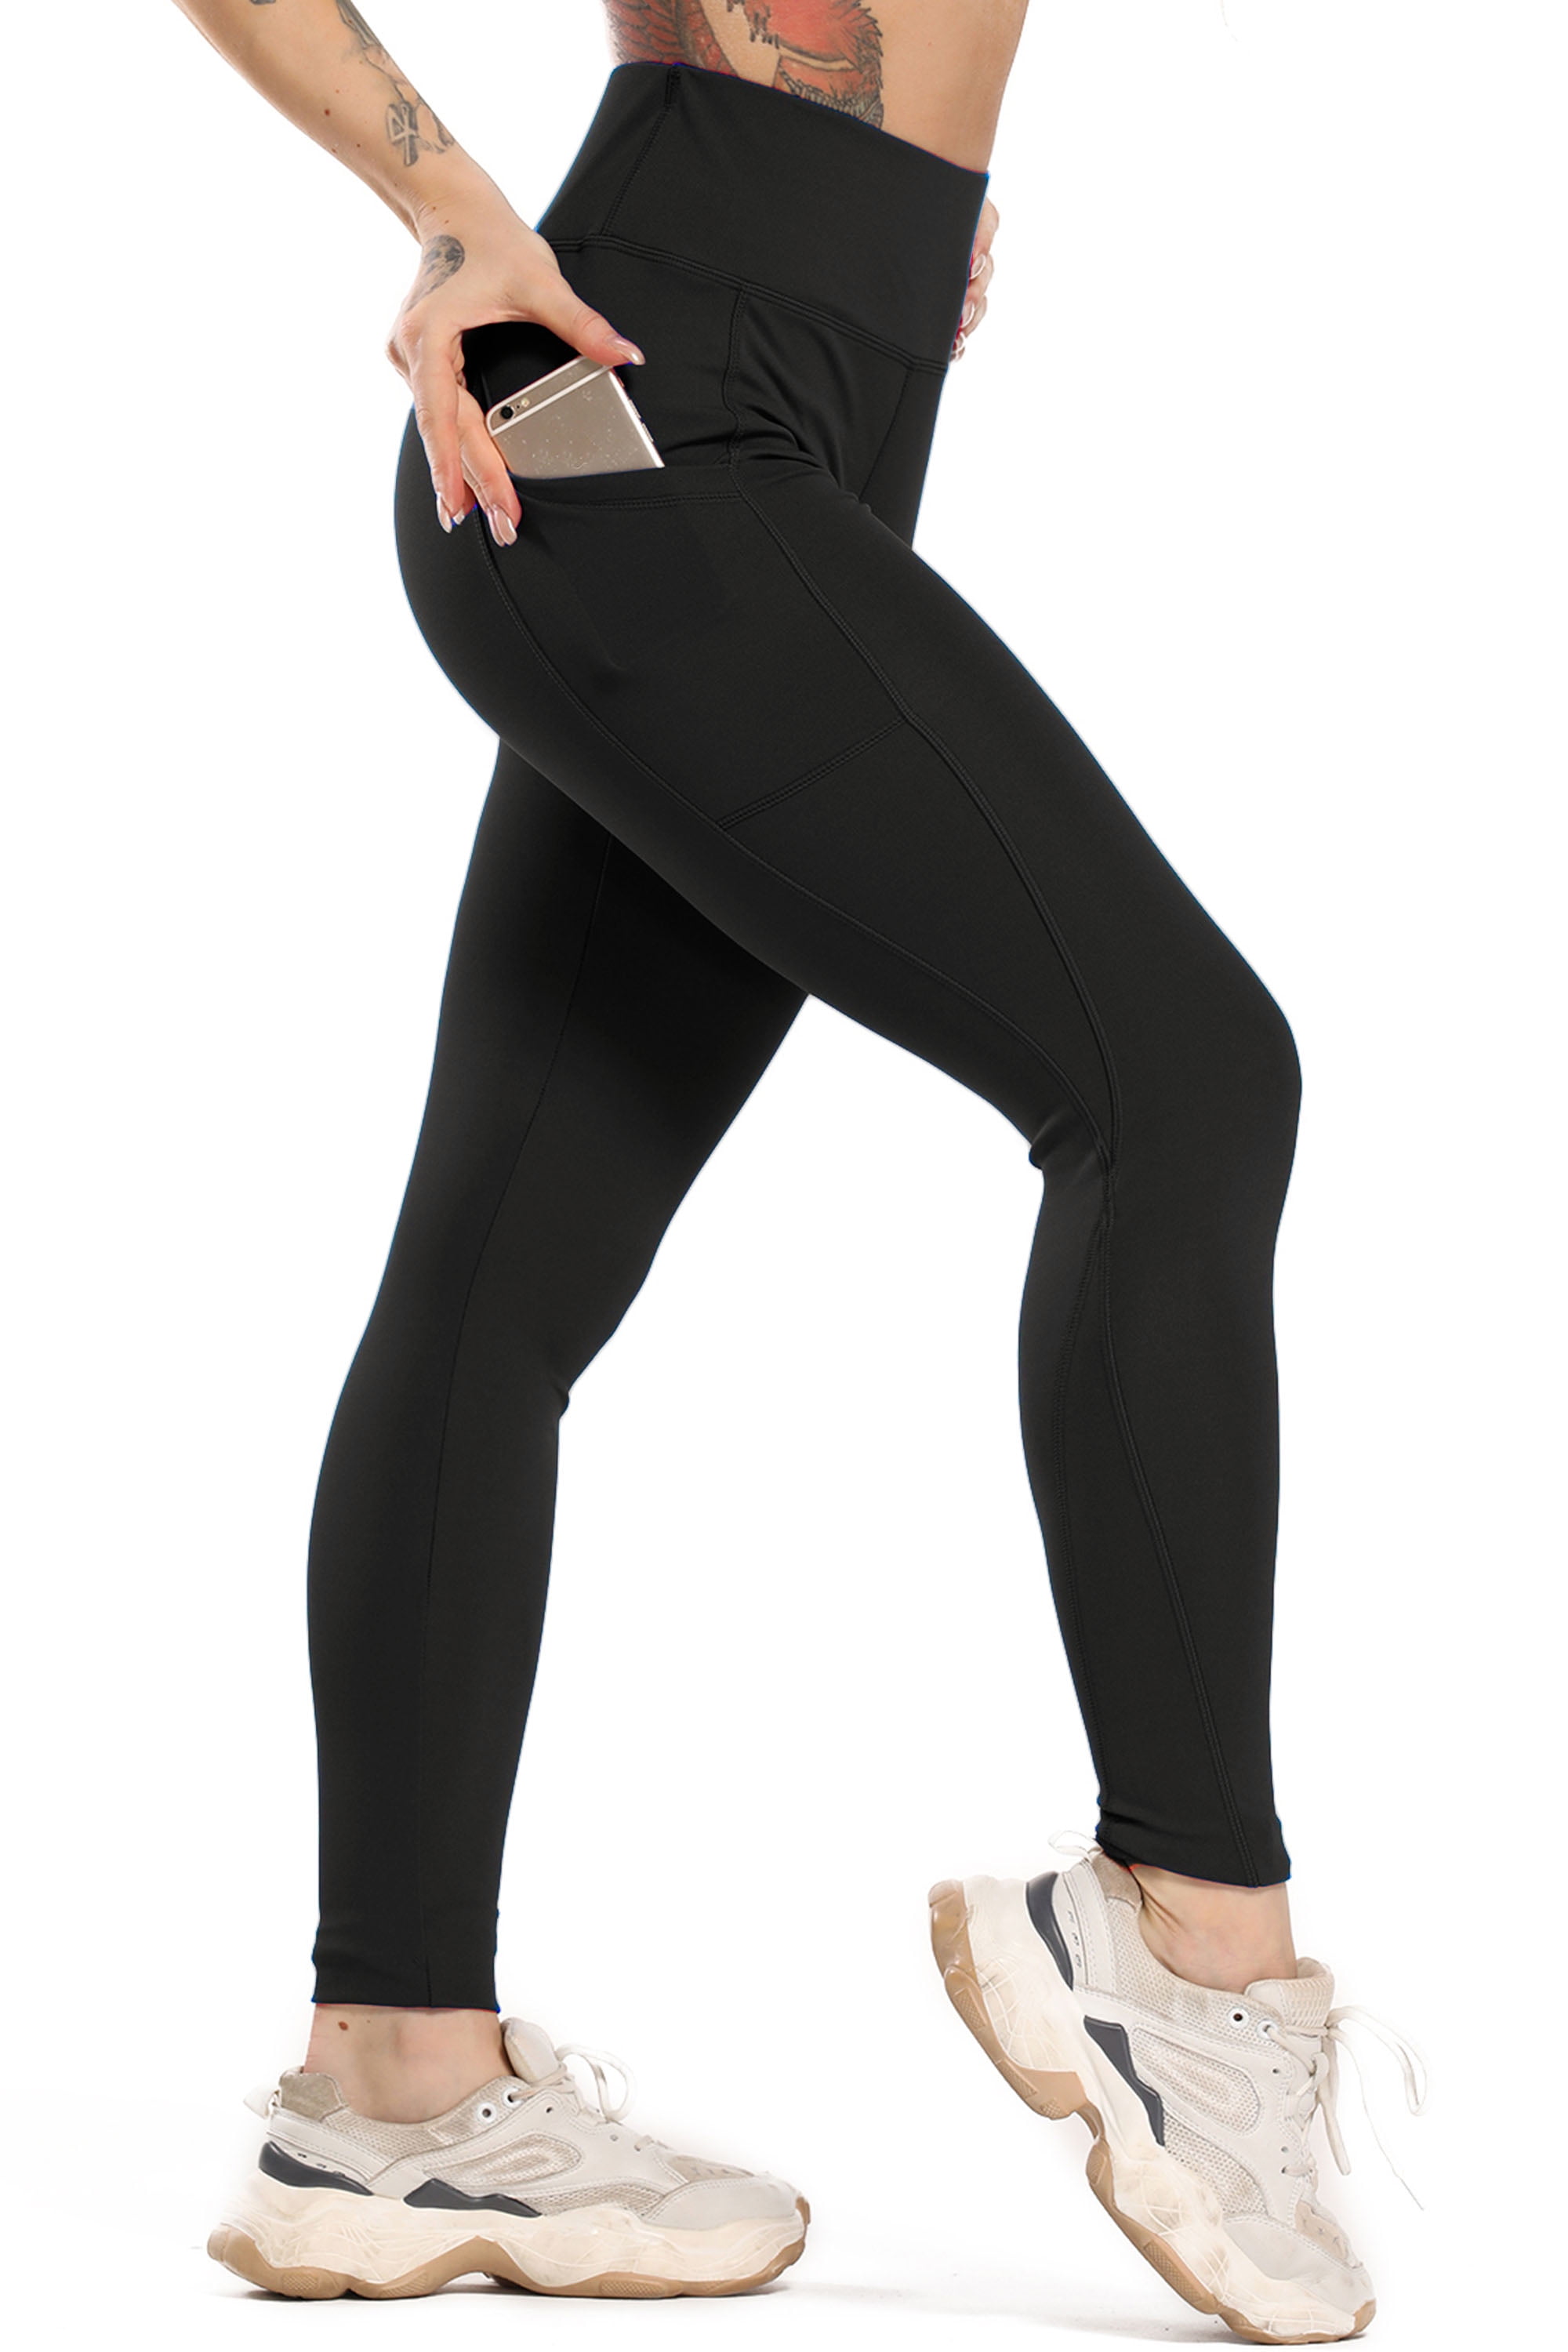 Casulo Althletic Pants Leggings with Pockets for Women High Waisted Yoga Pants for Women Workout Tummy Control Butt Lift